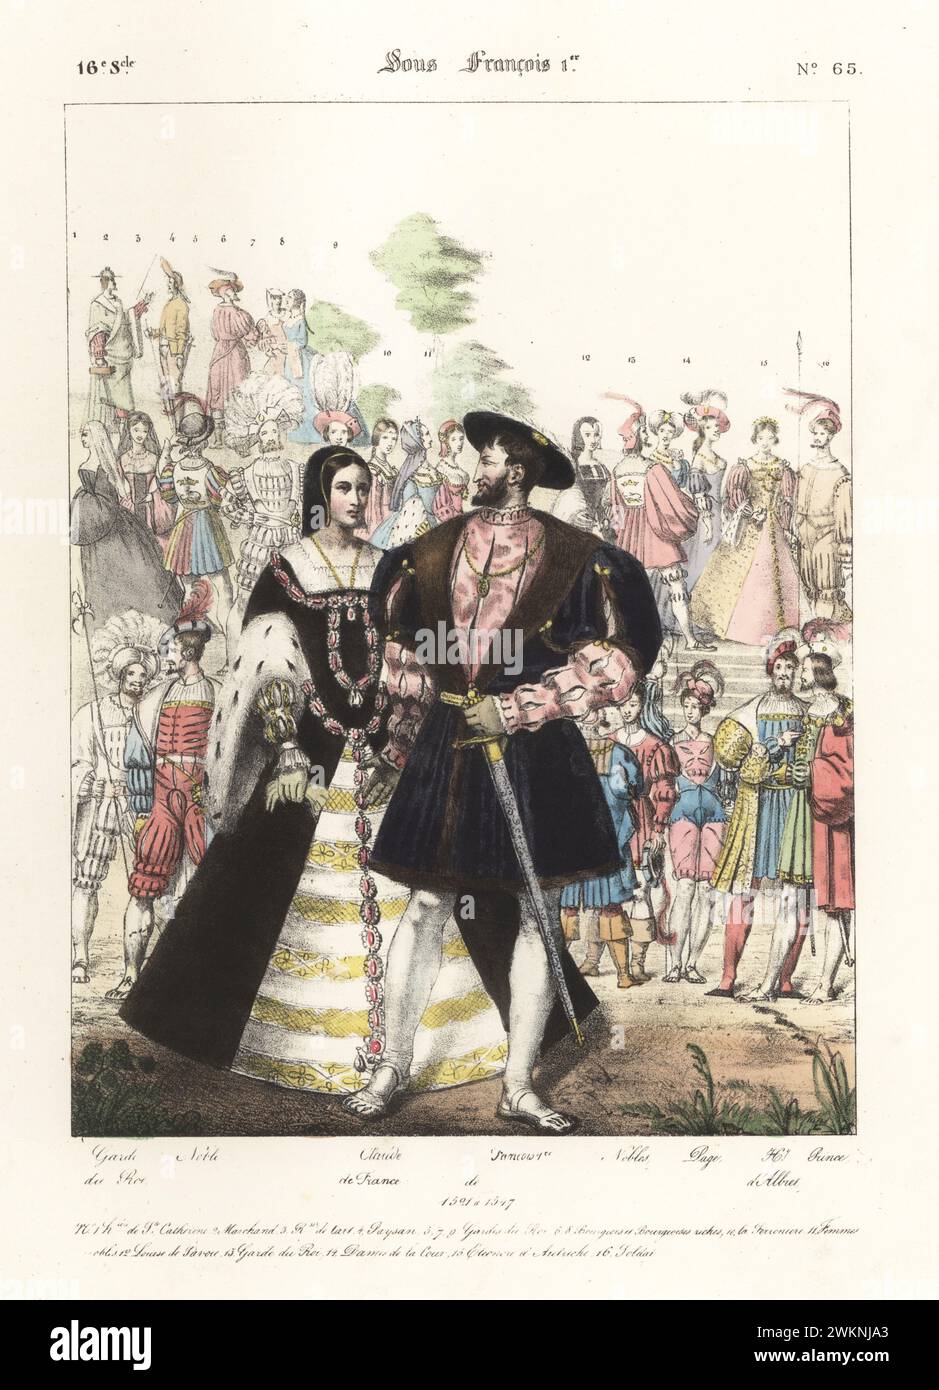 Claude, Duchess of Brittany, and King Francis I of France. King in cap, fur-lined cape, slashed doublet and hose, queen in ermine-lined robe with jeweled belt. With royal guards, nobles, page, Henry d'Albier and prince. Garde du Roi, Noble, Claude de France, Francois 1, Nobles, Page, Henry d'Albier, Prince. Sous Francois 1. Handcoloured lithograph by Godard after an illustration by Charles Auguste Herbé from his own Costumes Francais, Civils, Militaires et Religieux, French Costumes, Civil, Military and Religious, Maison Martinet, Paris, 1837. Stock Photo